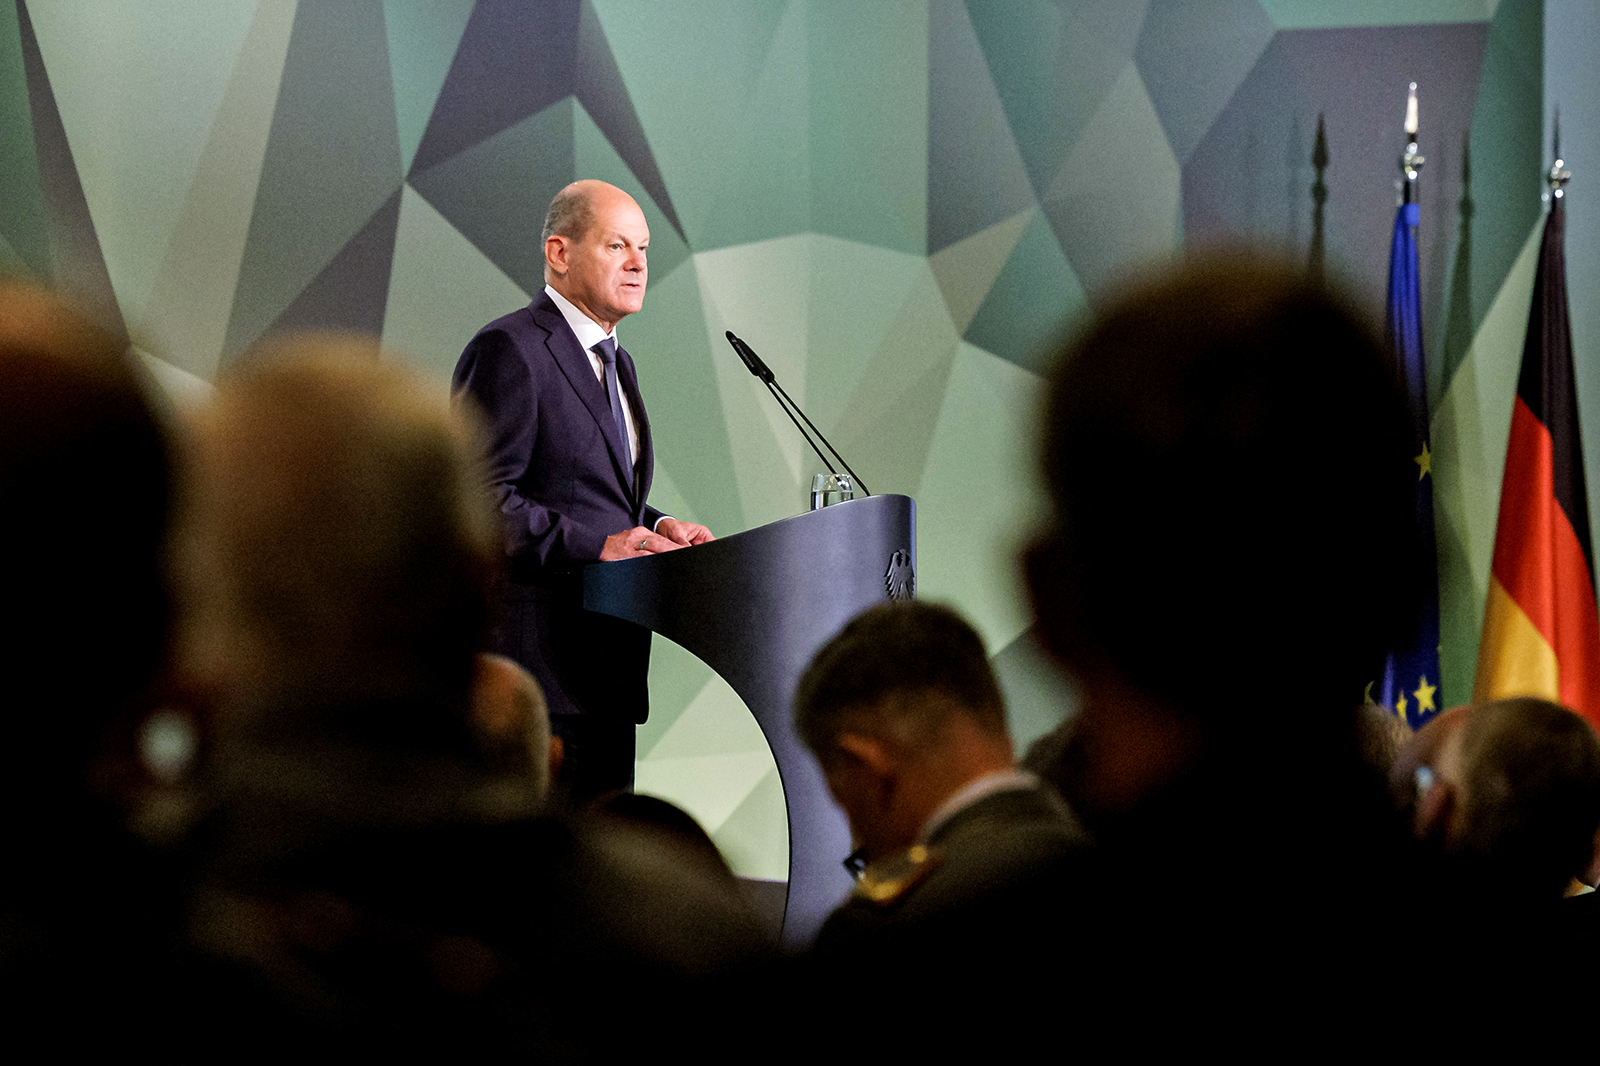 German Chancellor Olaf Scholz addresses a conference of the German Armed Forces Bundeswehr in Berlin on Friday.